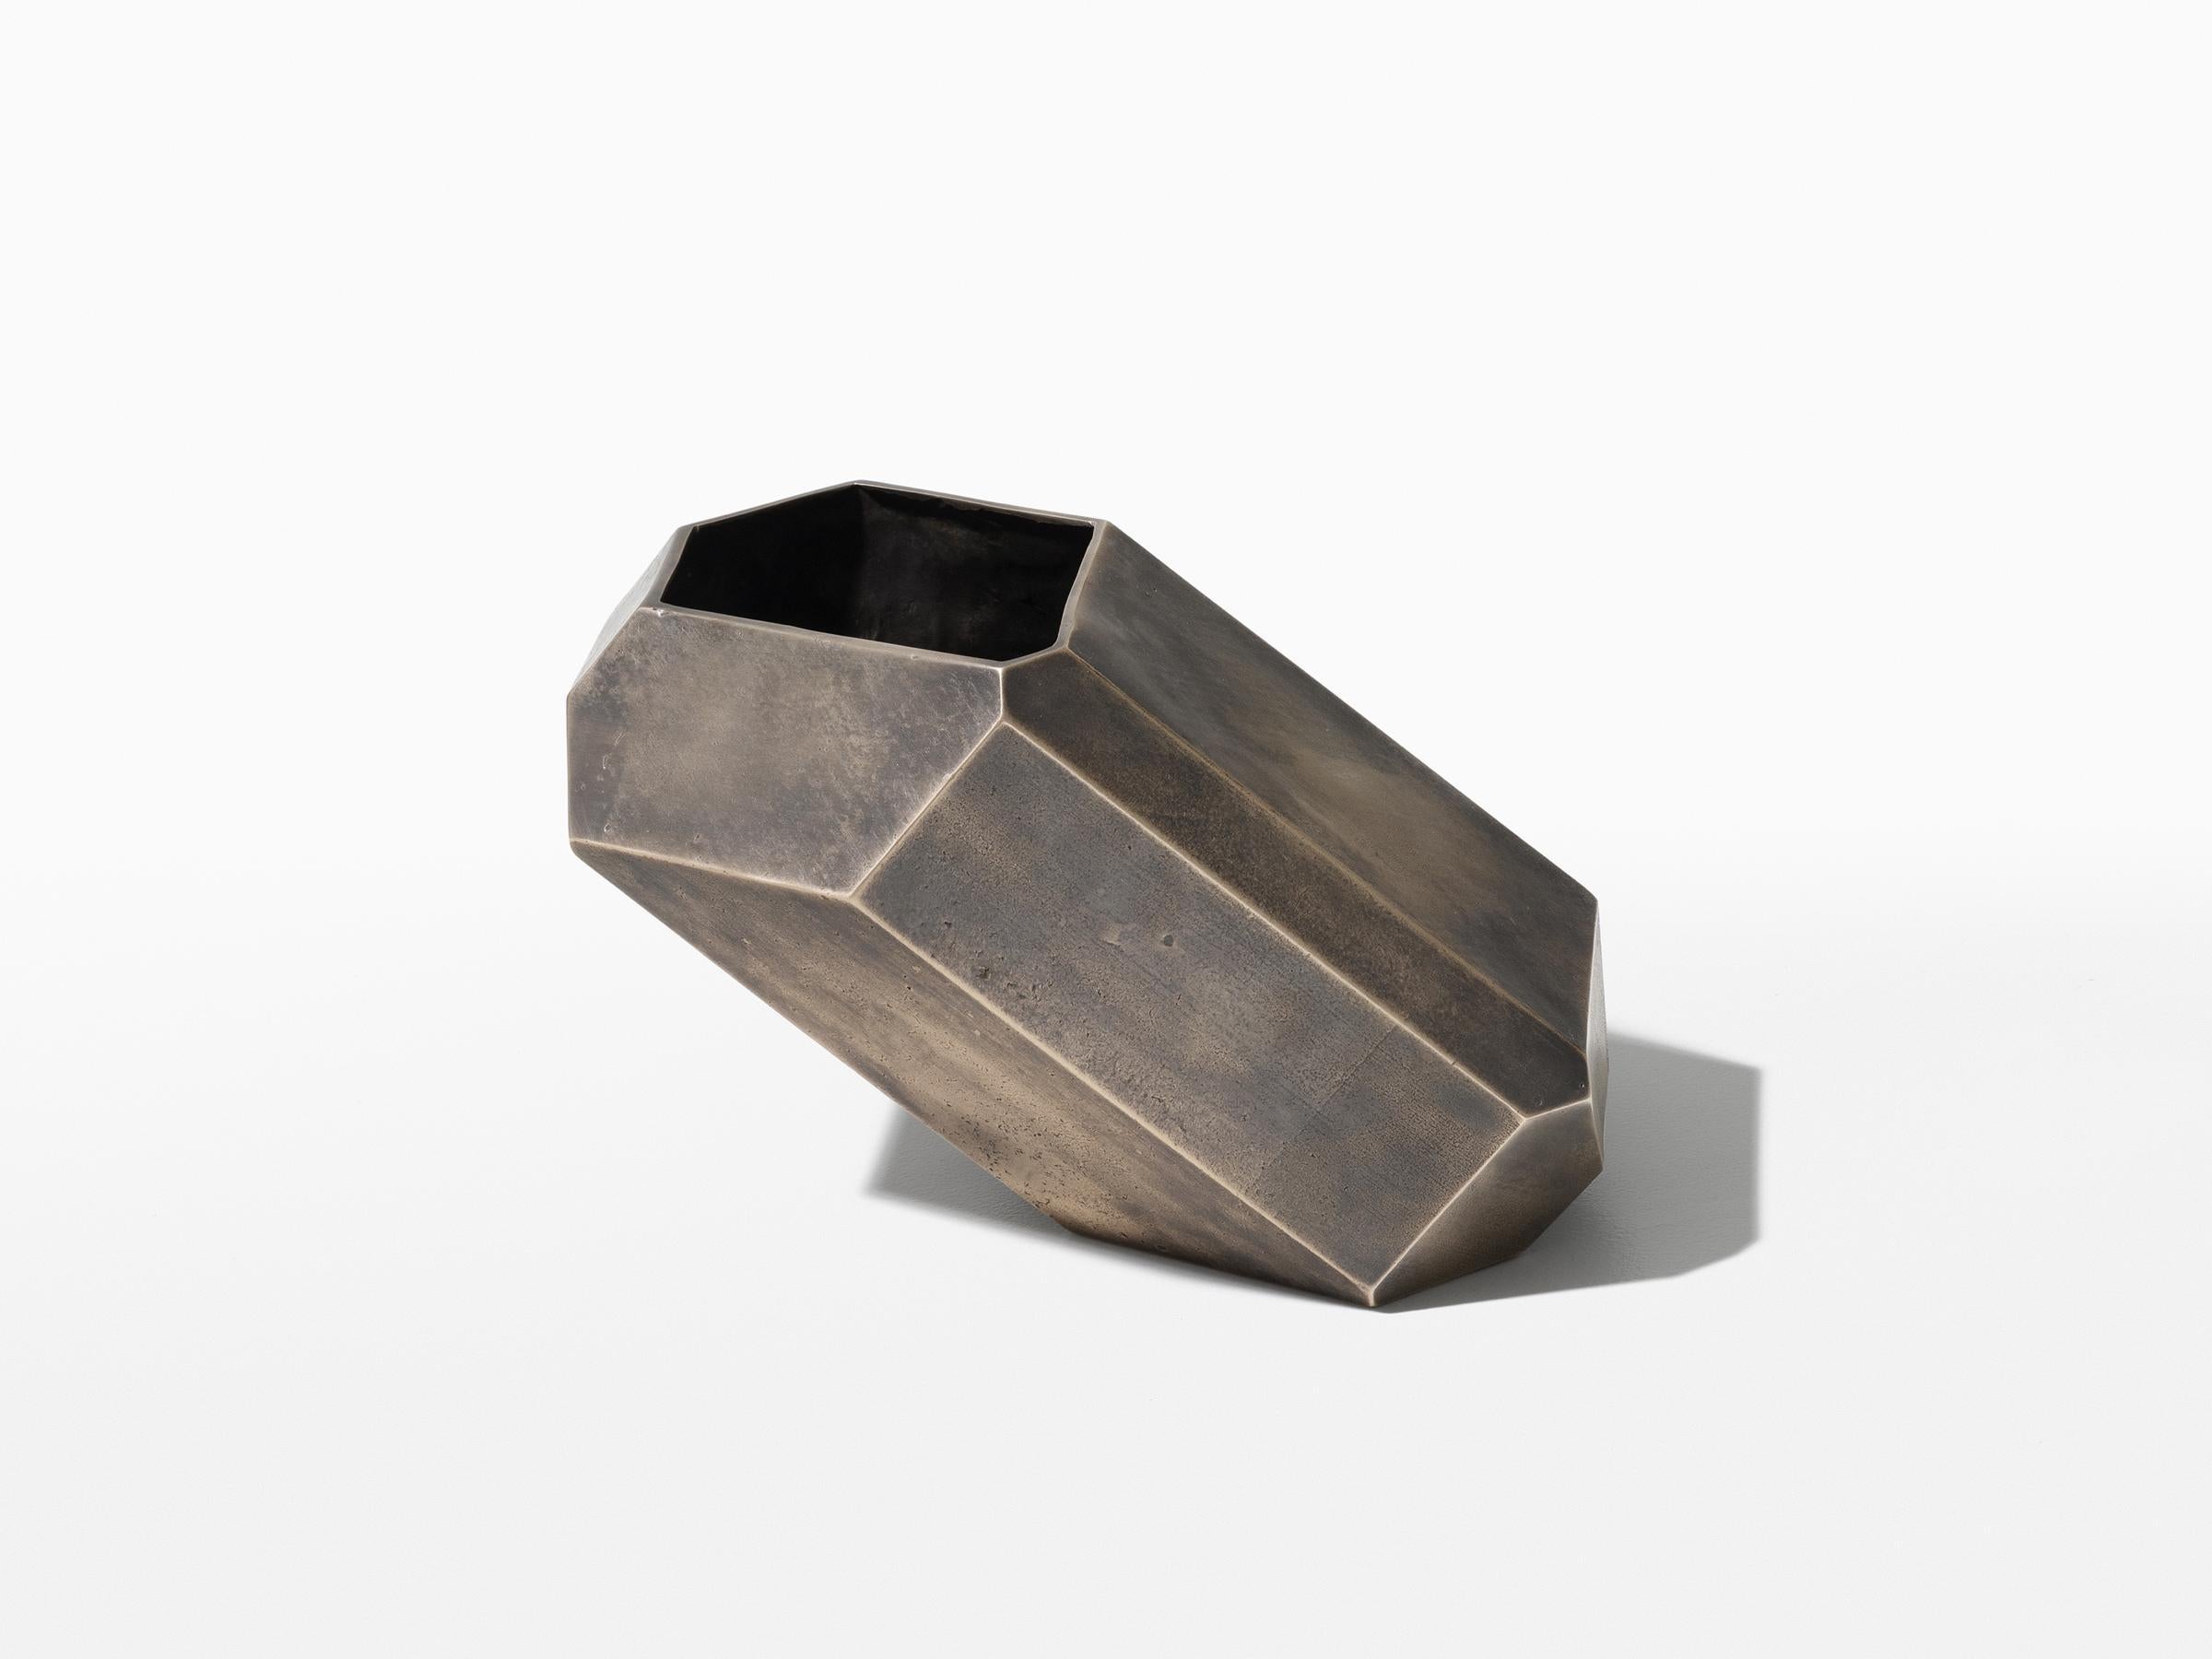 Holly Hunt Faceted block vertical vase in bronze by Stefan Gulassa

Faceted Block Vase Vertical

Stefan Gulassa was born the youngest of six in a highly creative family that continues to influence his work. After studying Industrial Design in